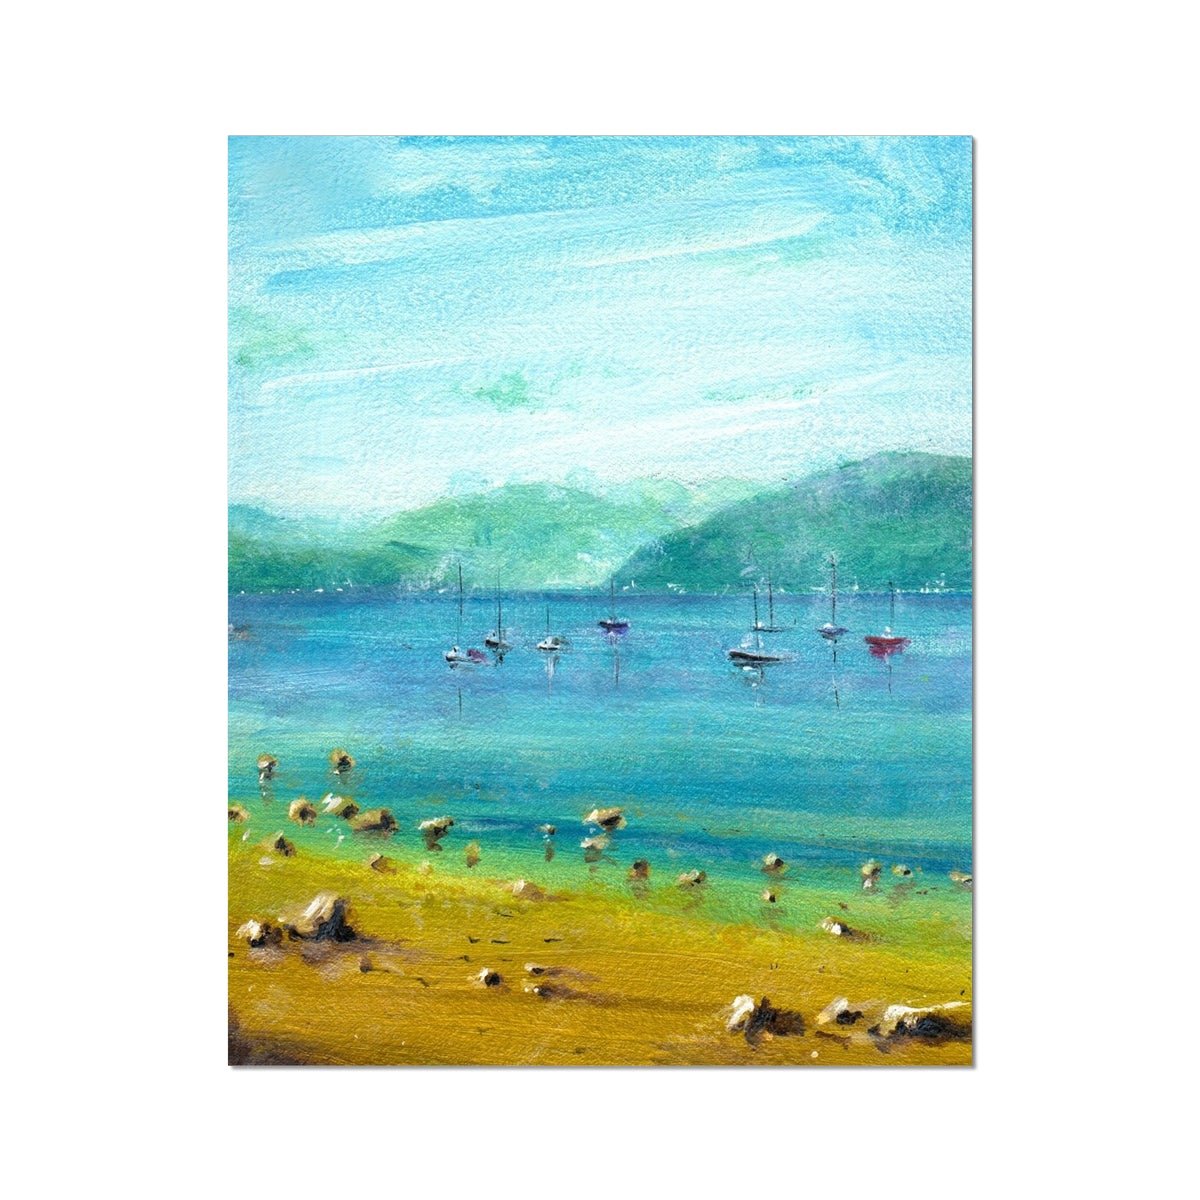 A Summer Day On The Clyde Painting | Artist Proof Collector Prints From Scotland-Artist Proof Collector Prints-River Clyde Art Gallery-16"x20"-Paintings, Prints, Homeware, Art Gifts From Scotland By Scottish Artist Kevin Hunter